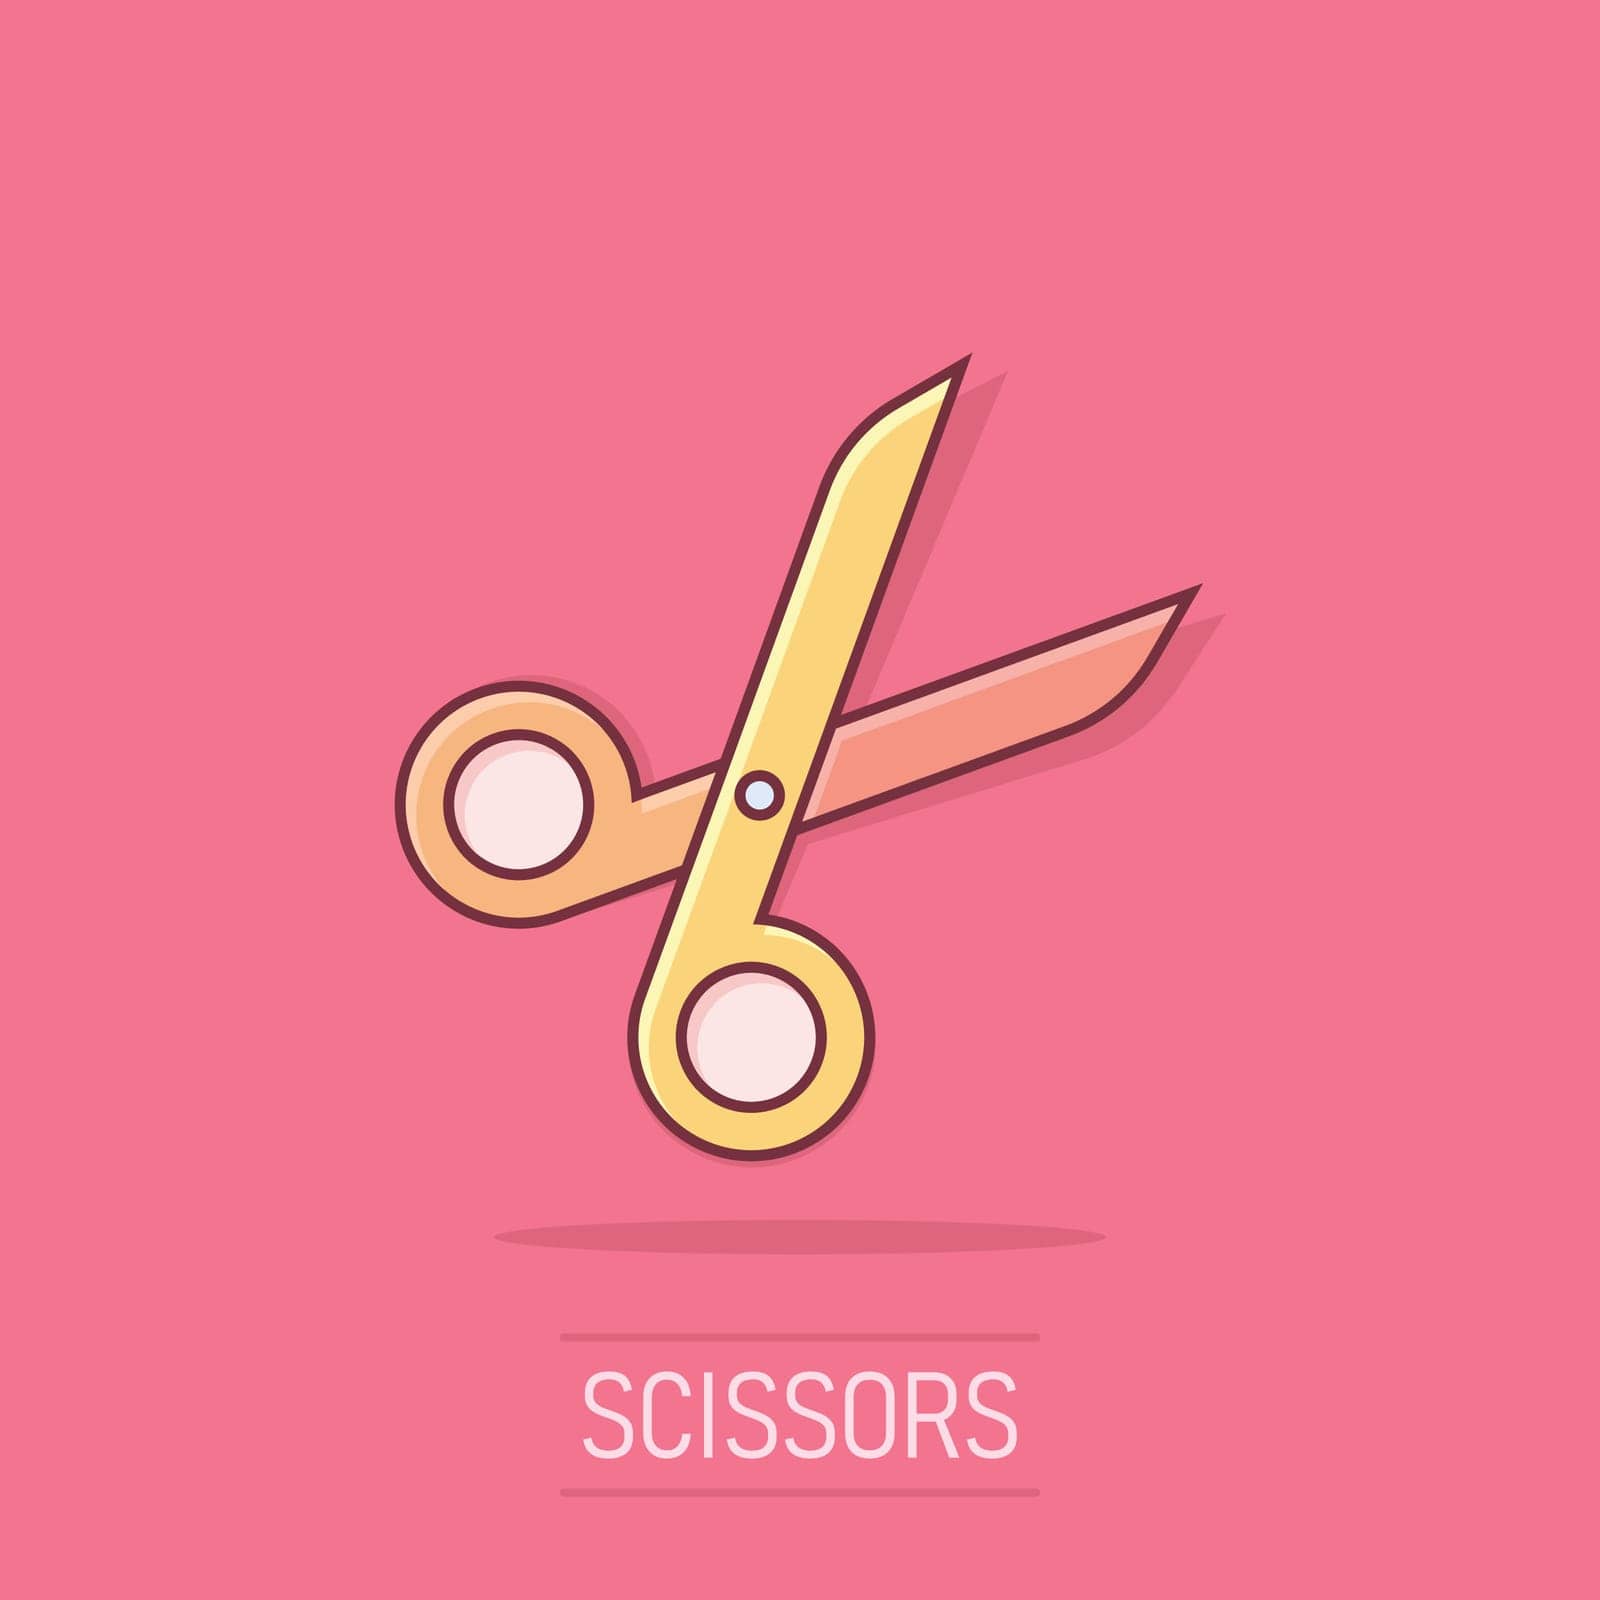 Scissor icon in comic style. Cut equipment cartoon vector illustration on isolated background. Cutter splash effect business concept. by LysenkoA